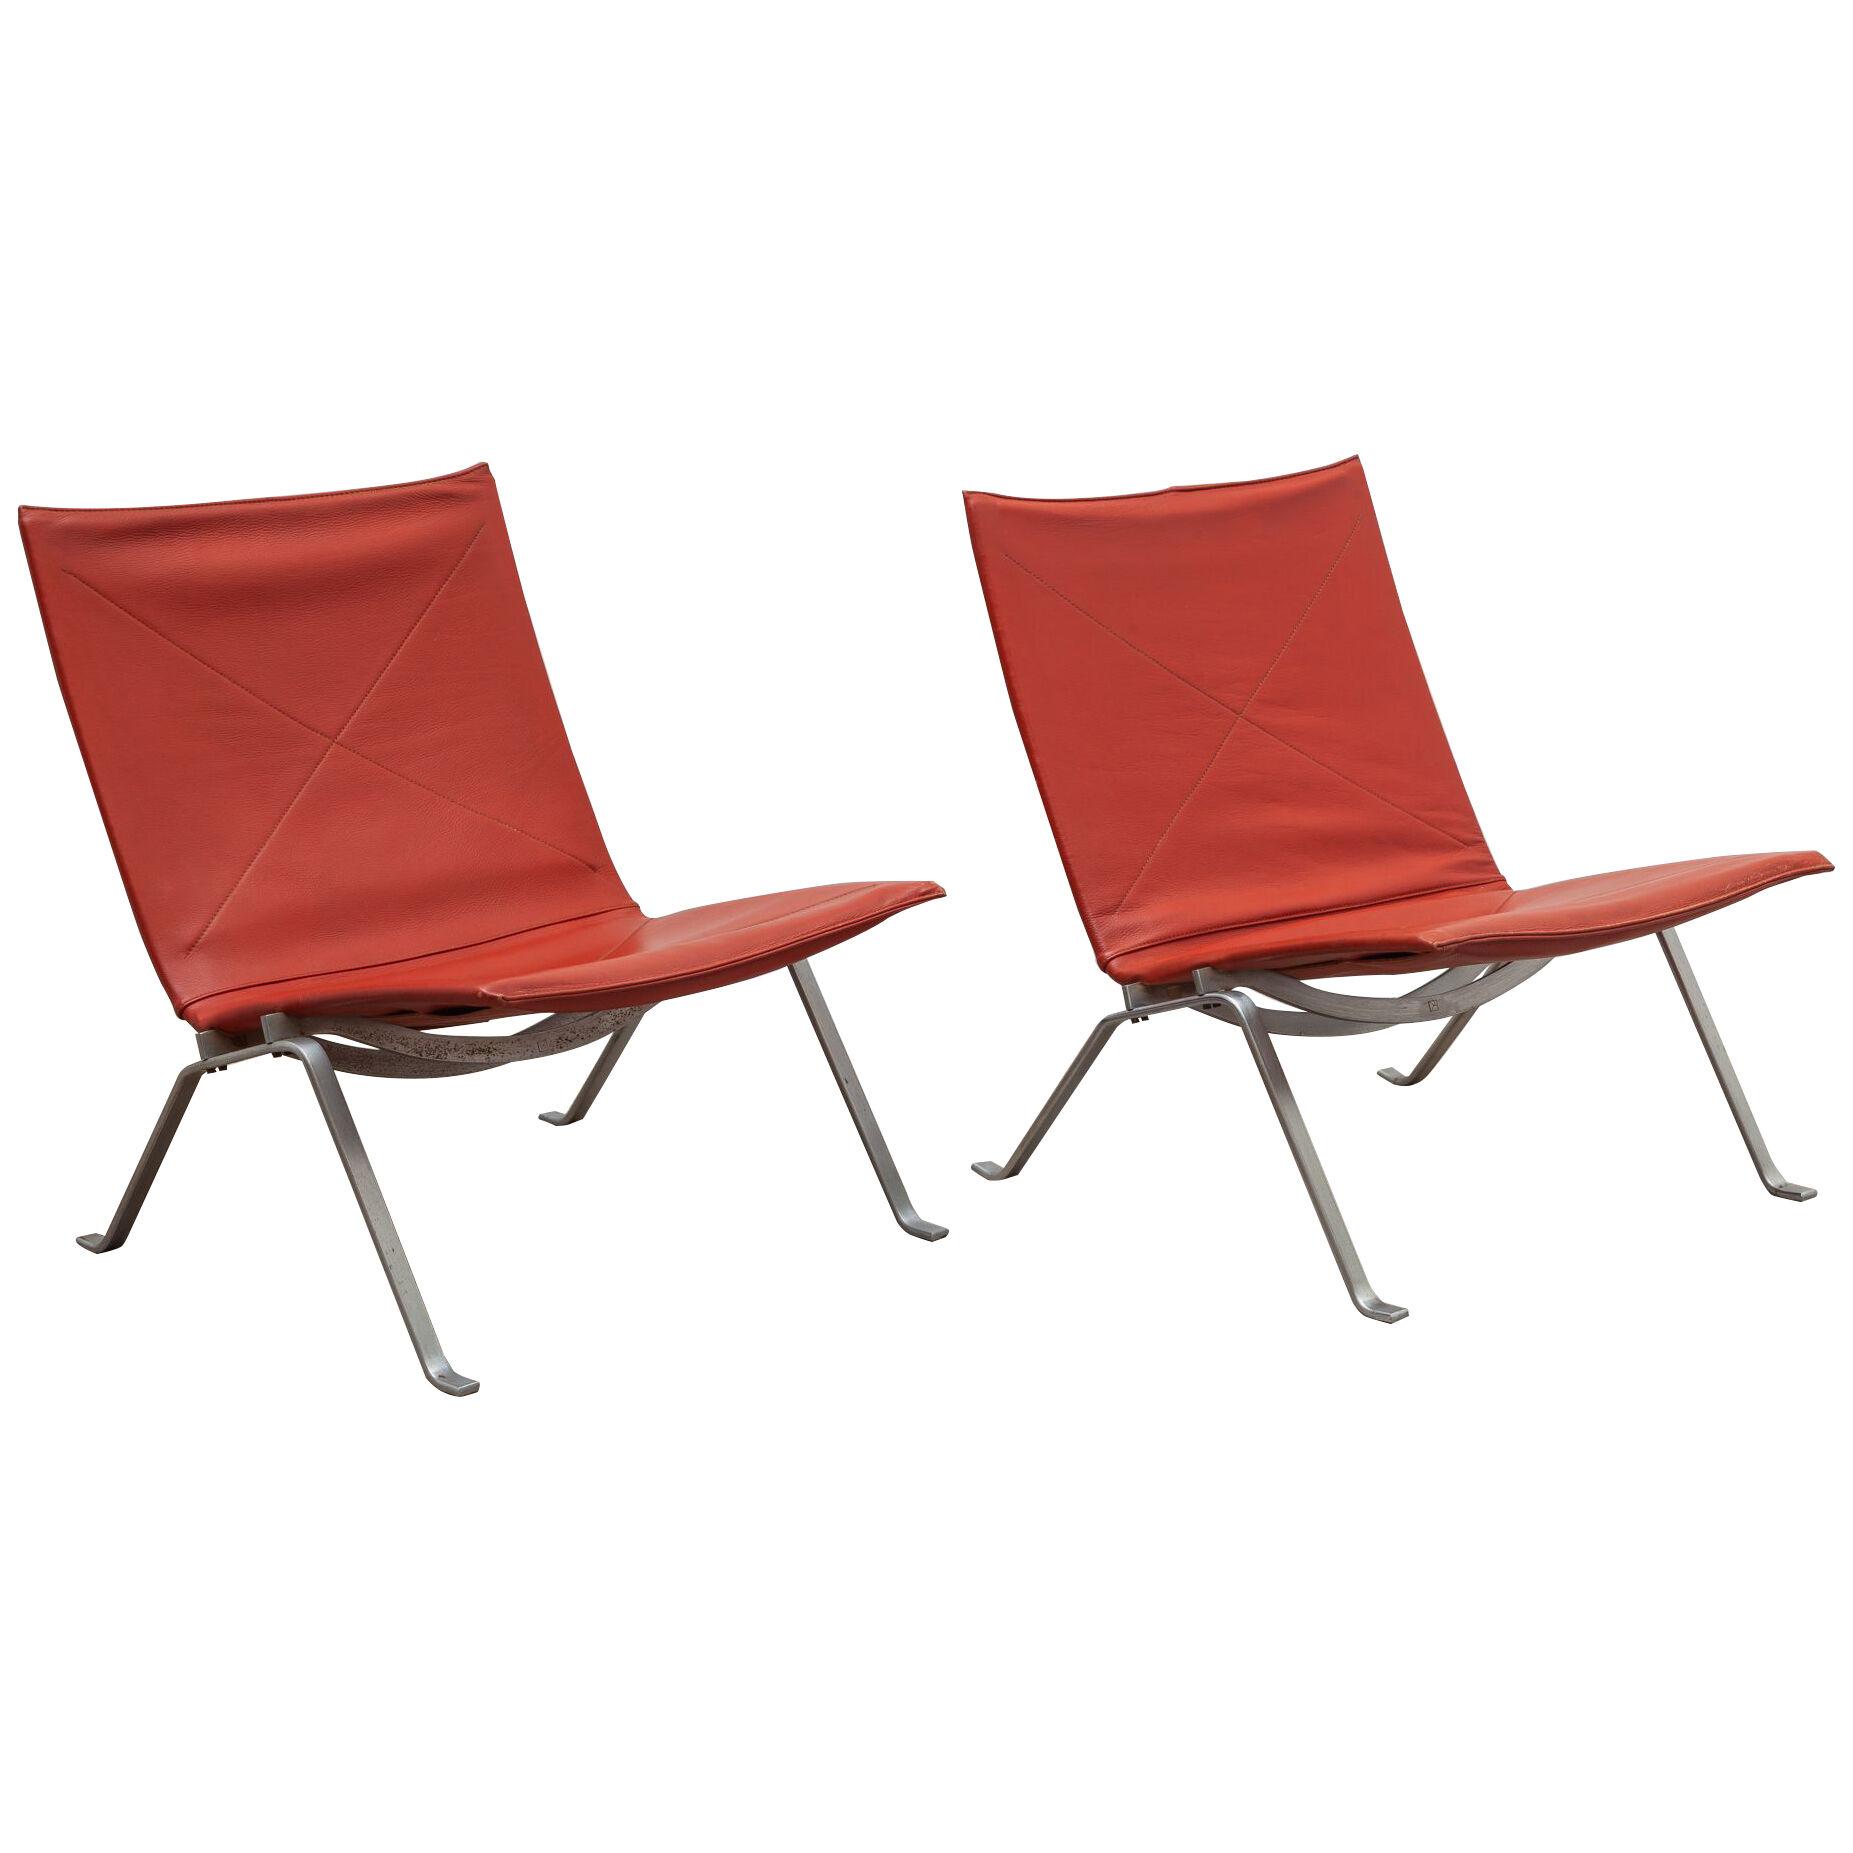 Pair of PK 22 Lounge Chairs by Poul Kjearholm, Denmark, Oxblood Leather